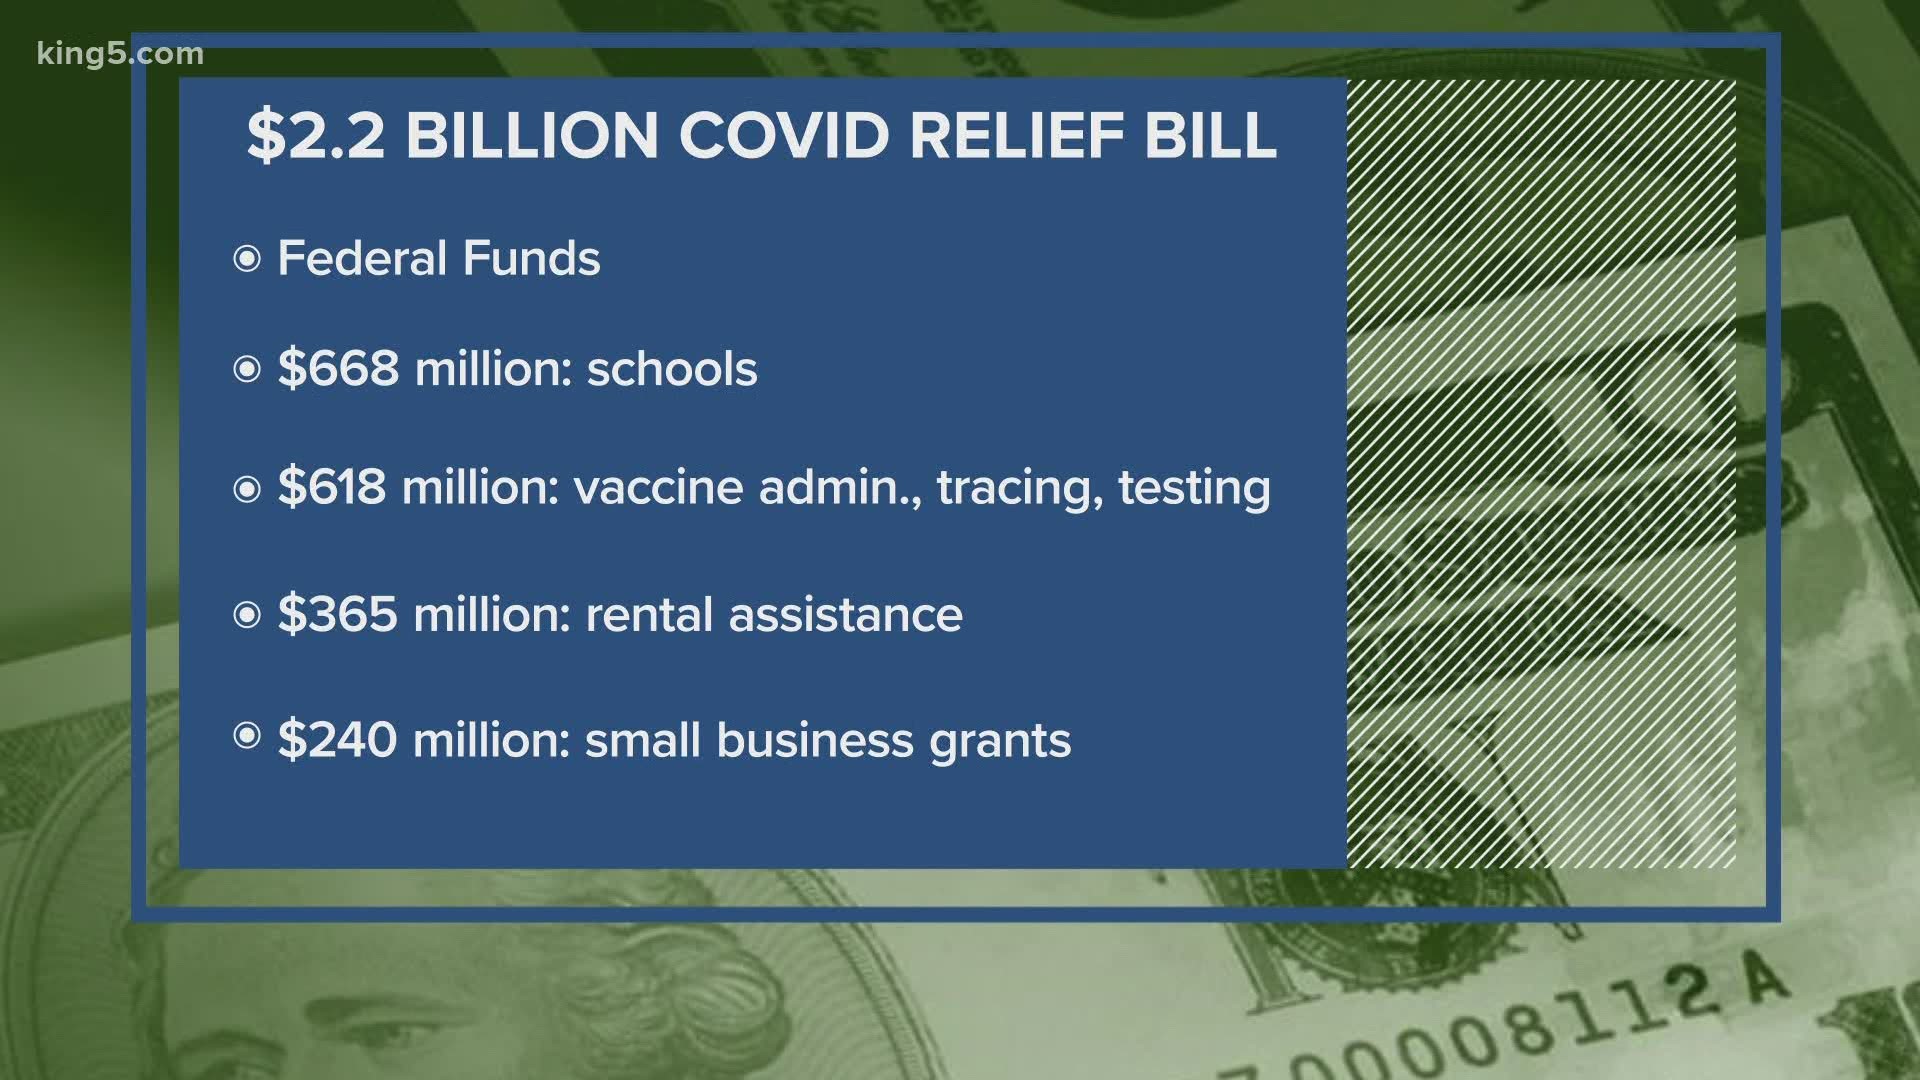 The relief bill includes millions in funding for schools, businesses, renters and landlords, as well as for COVID-19 vaccine and testing efforts.